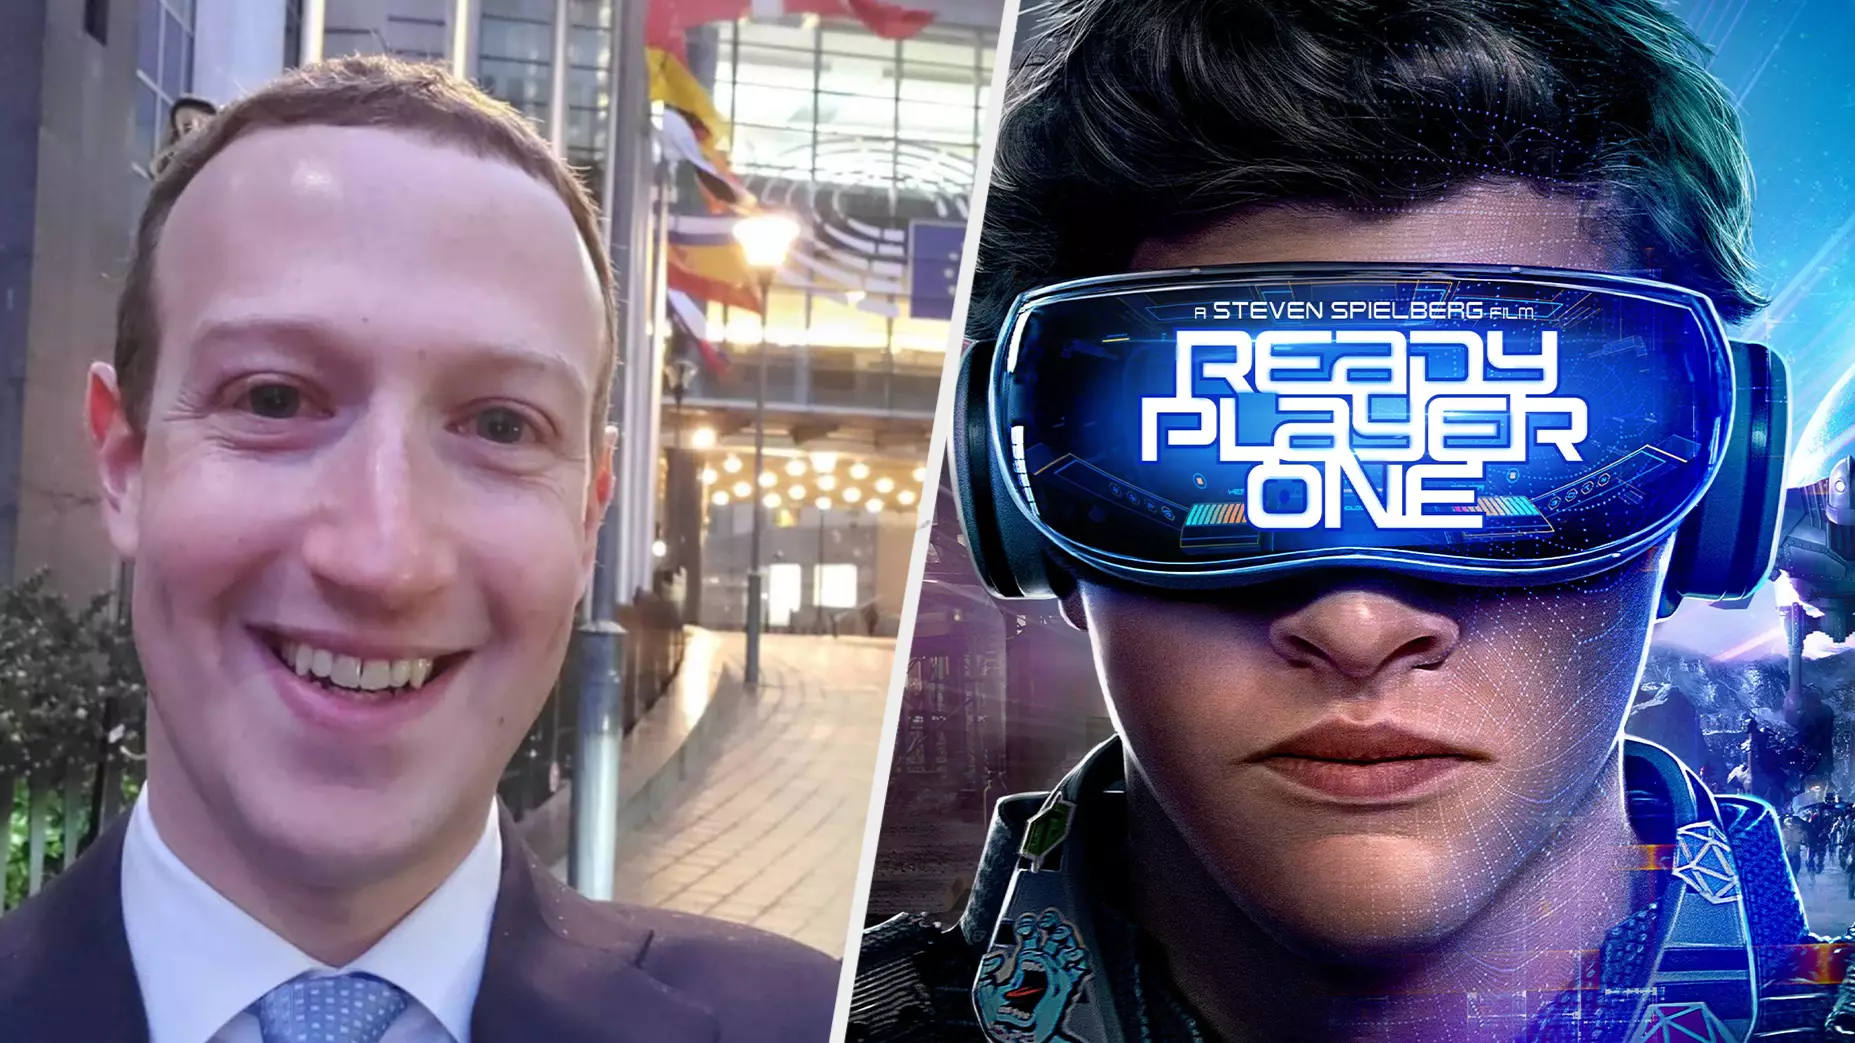 Mark Zuckerberg Wants To Create A 'Ready Player One'-Style Metaverse